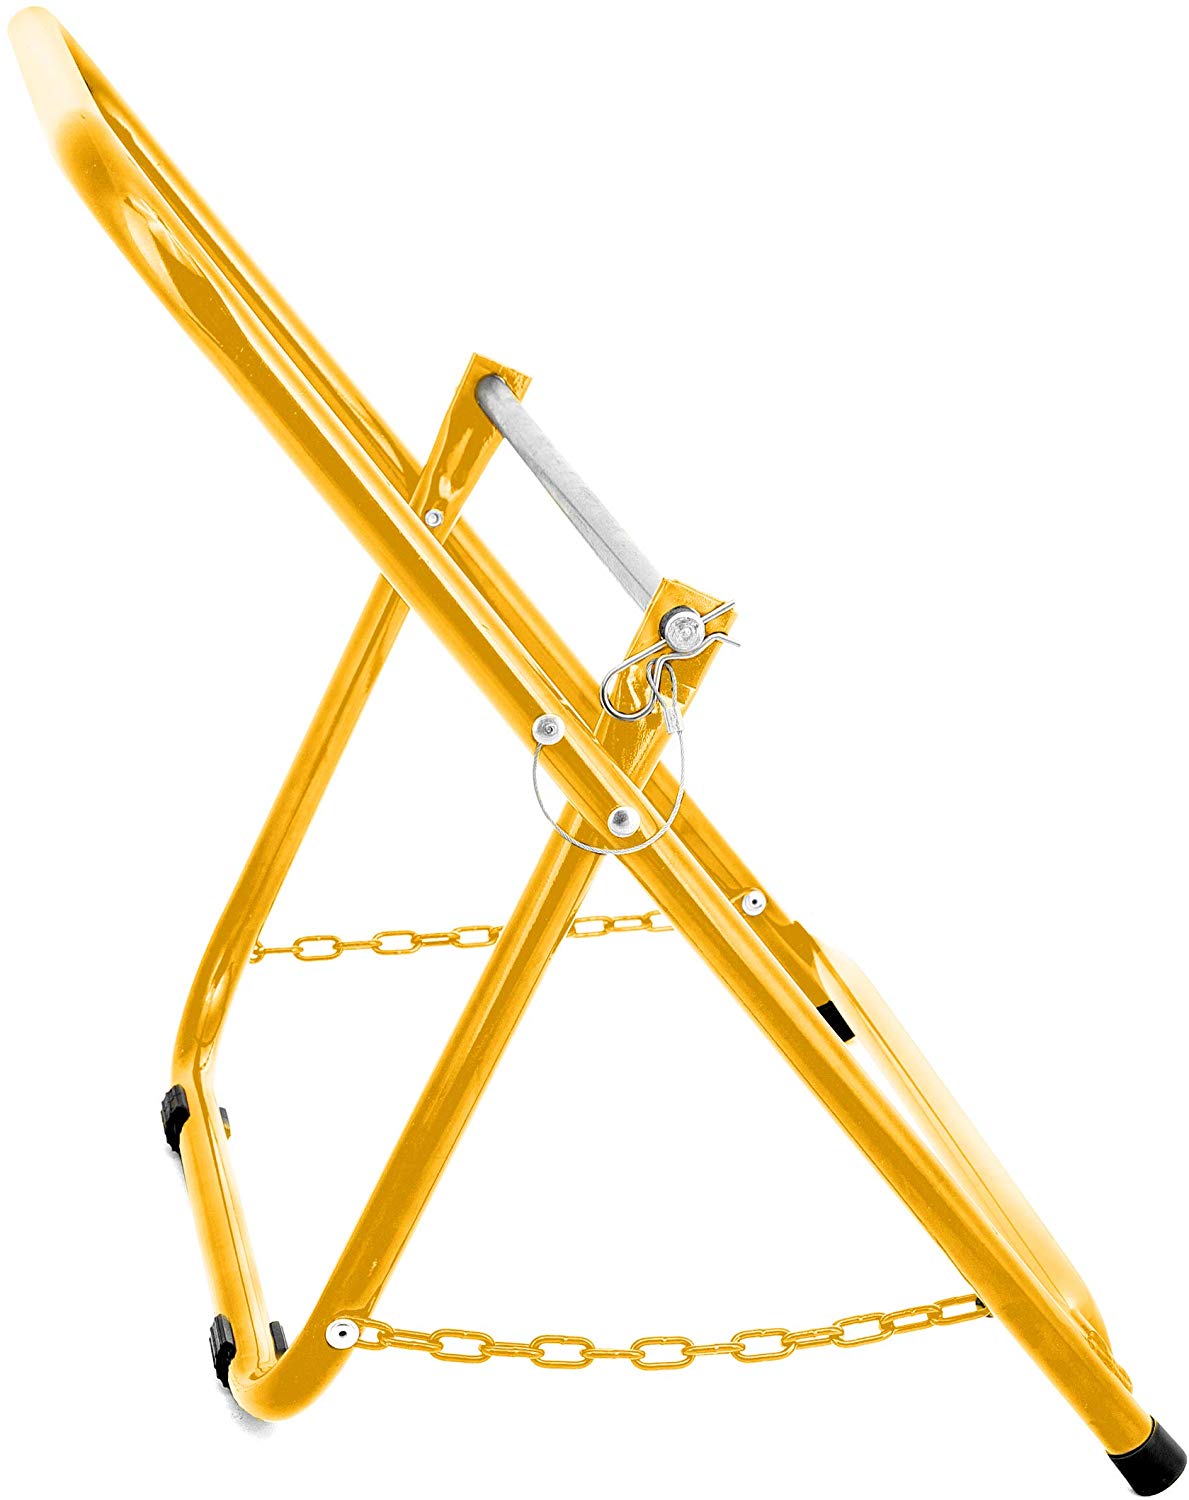 AdirPro AdirPro Foldable Wire Cable Caddy in Yellow at